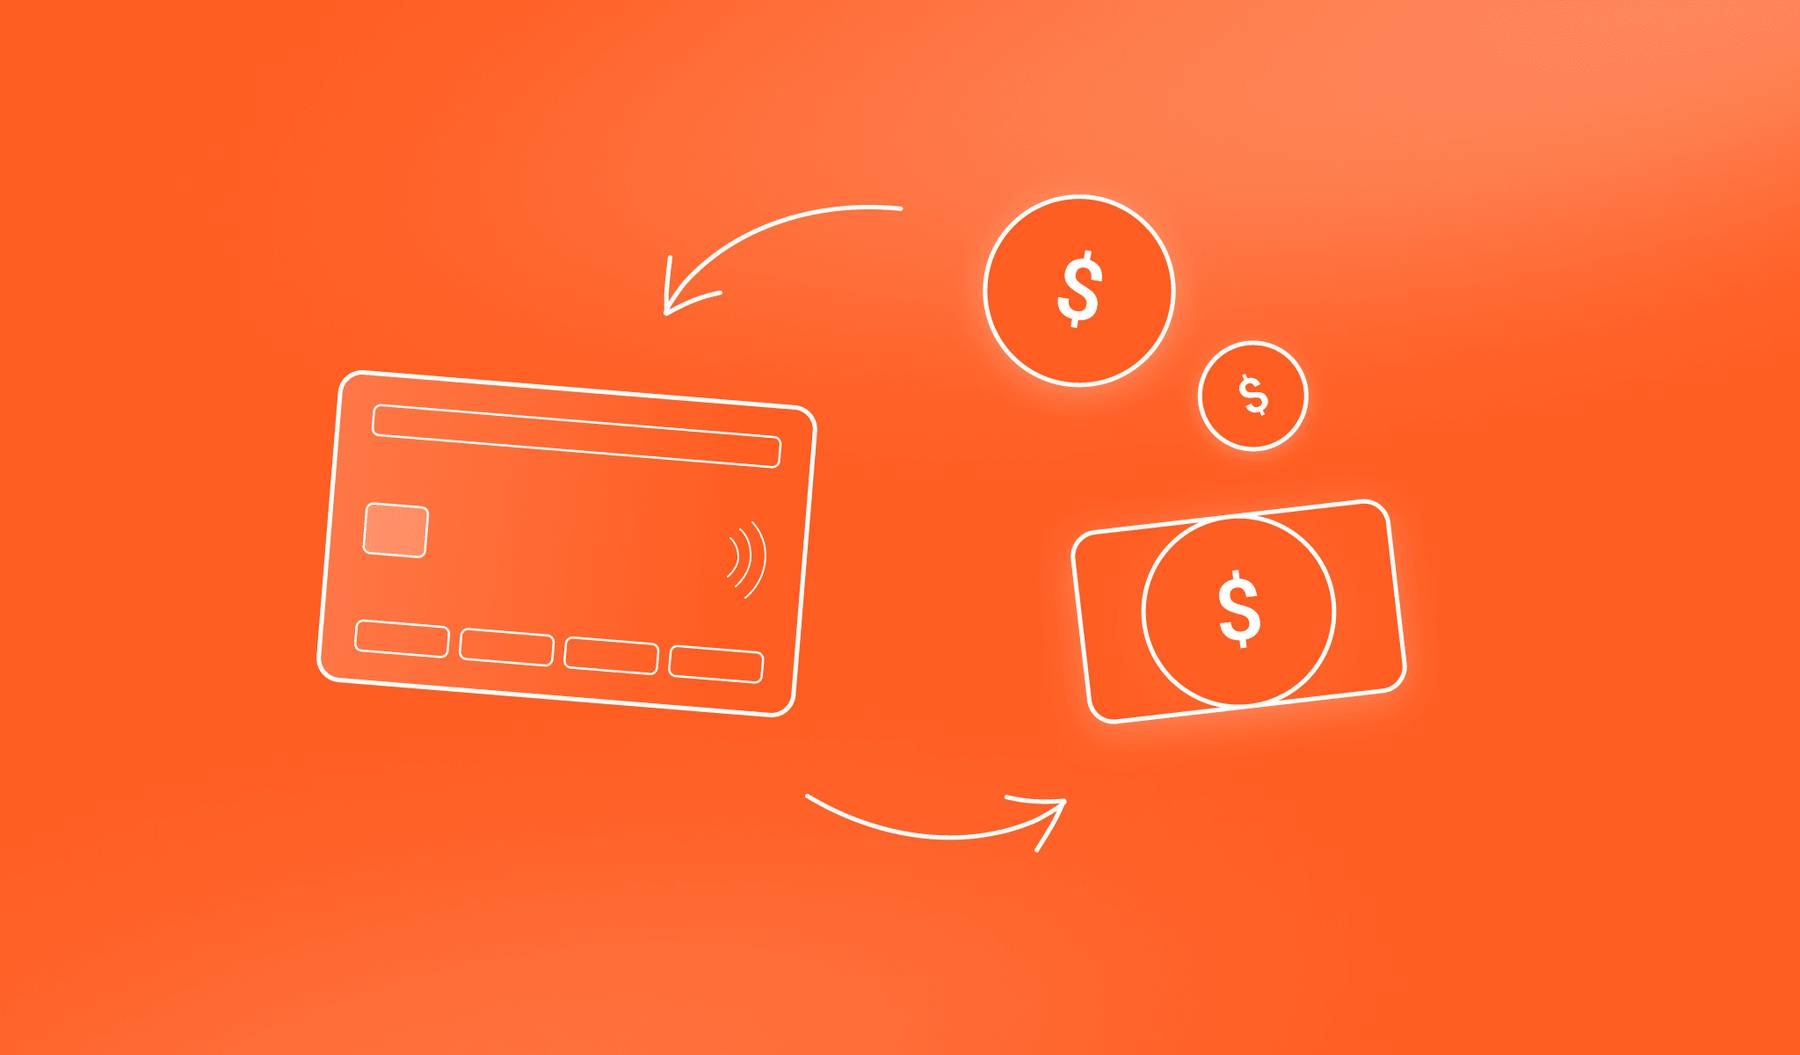 line illustration of credit card and currency on an orange background